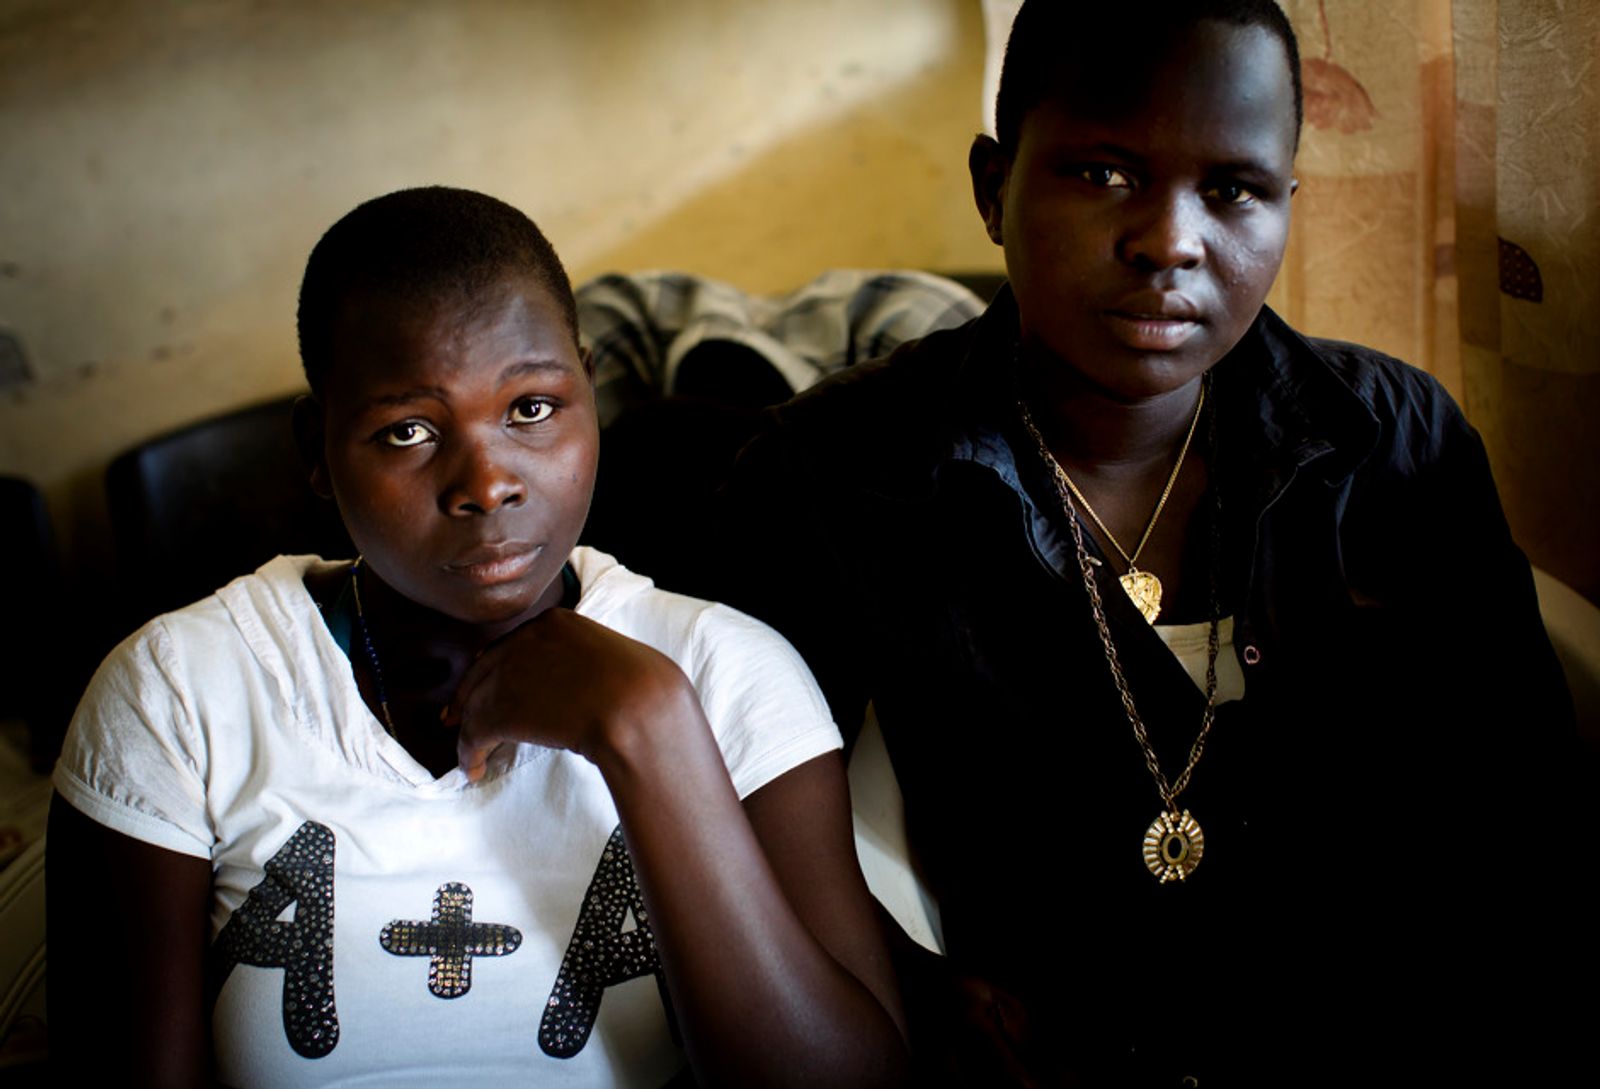 © Anne Ackermann - Image from the Gulu Youth photography project